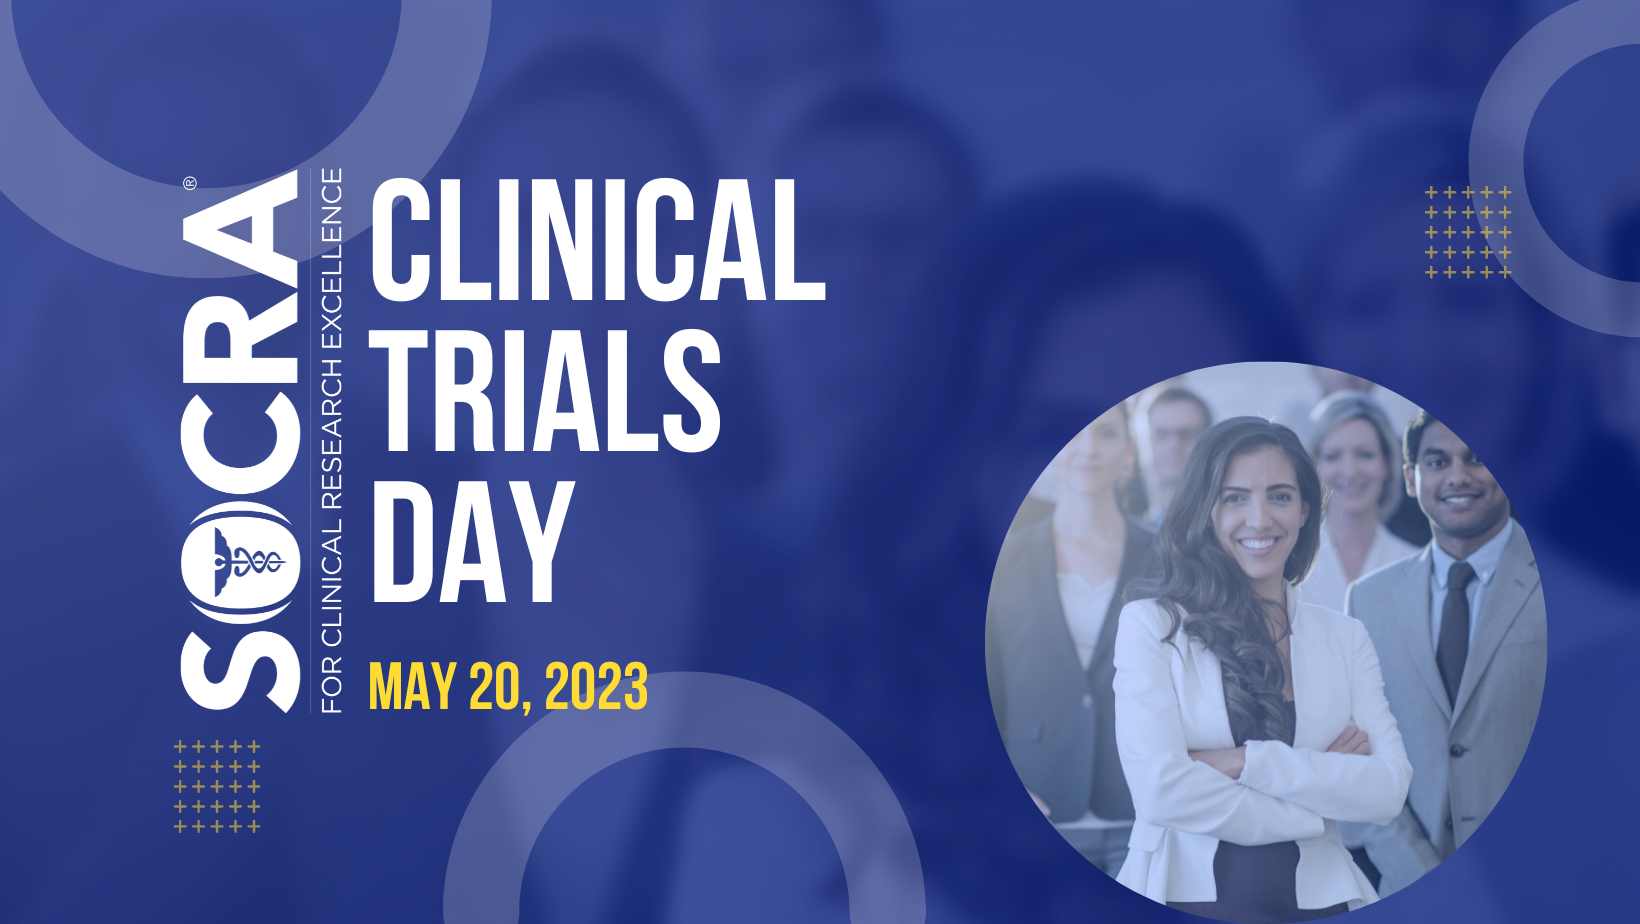 Celebrating Clinical Trials Day 2023 Let’s Raise Awareness & Honor